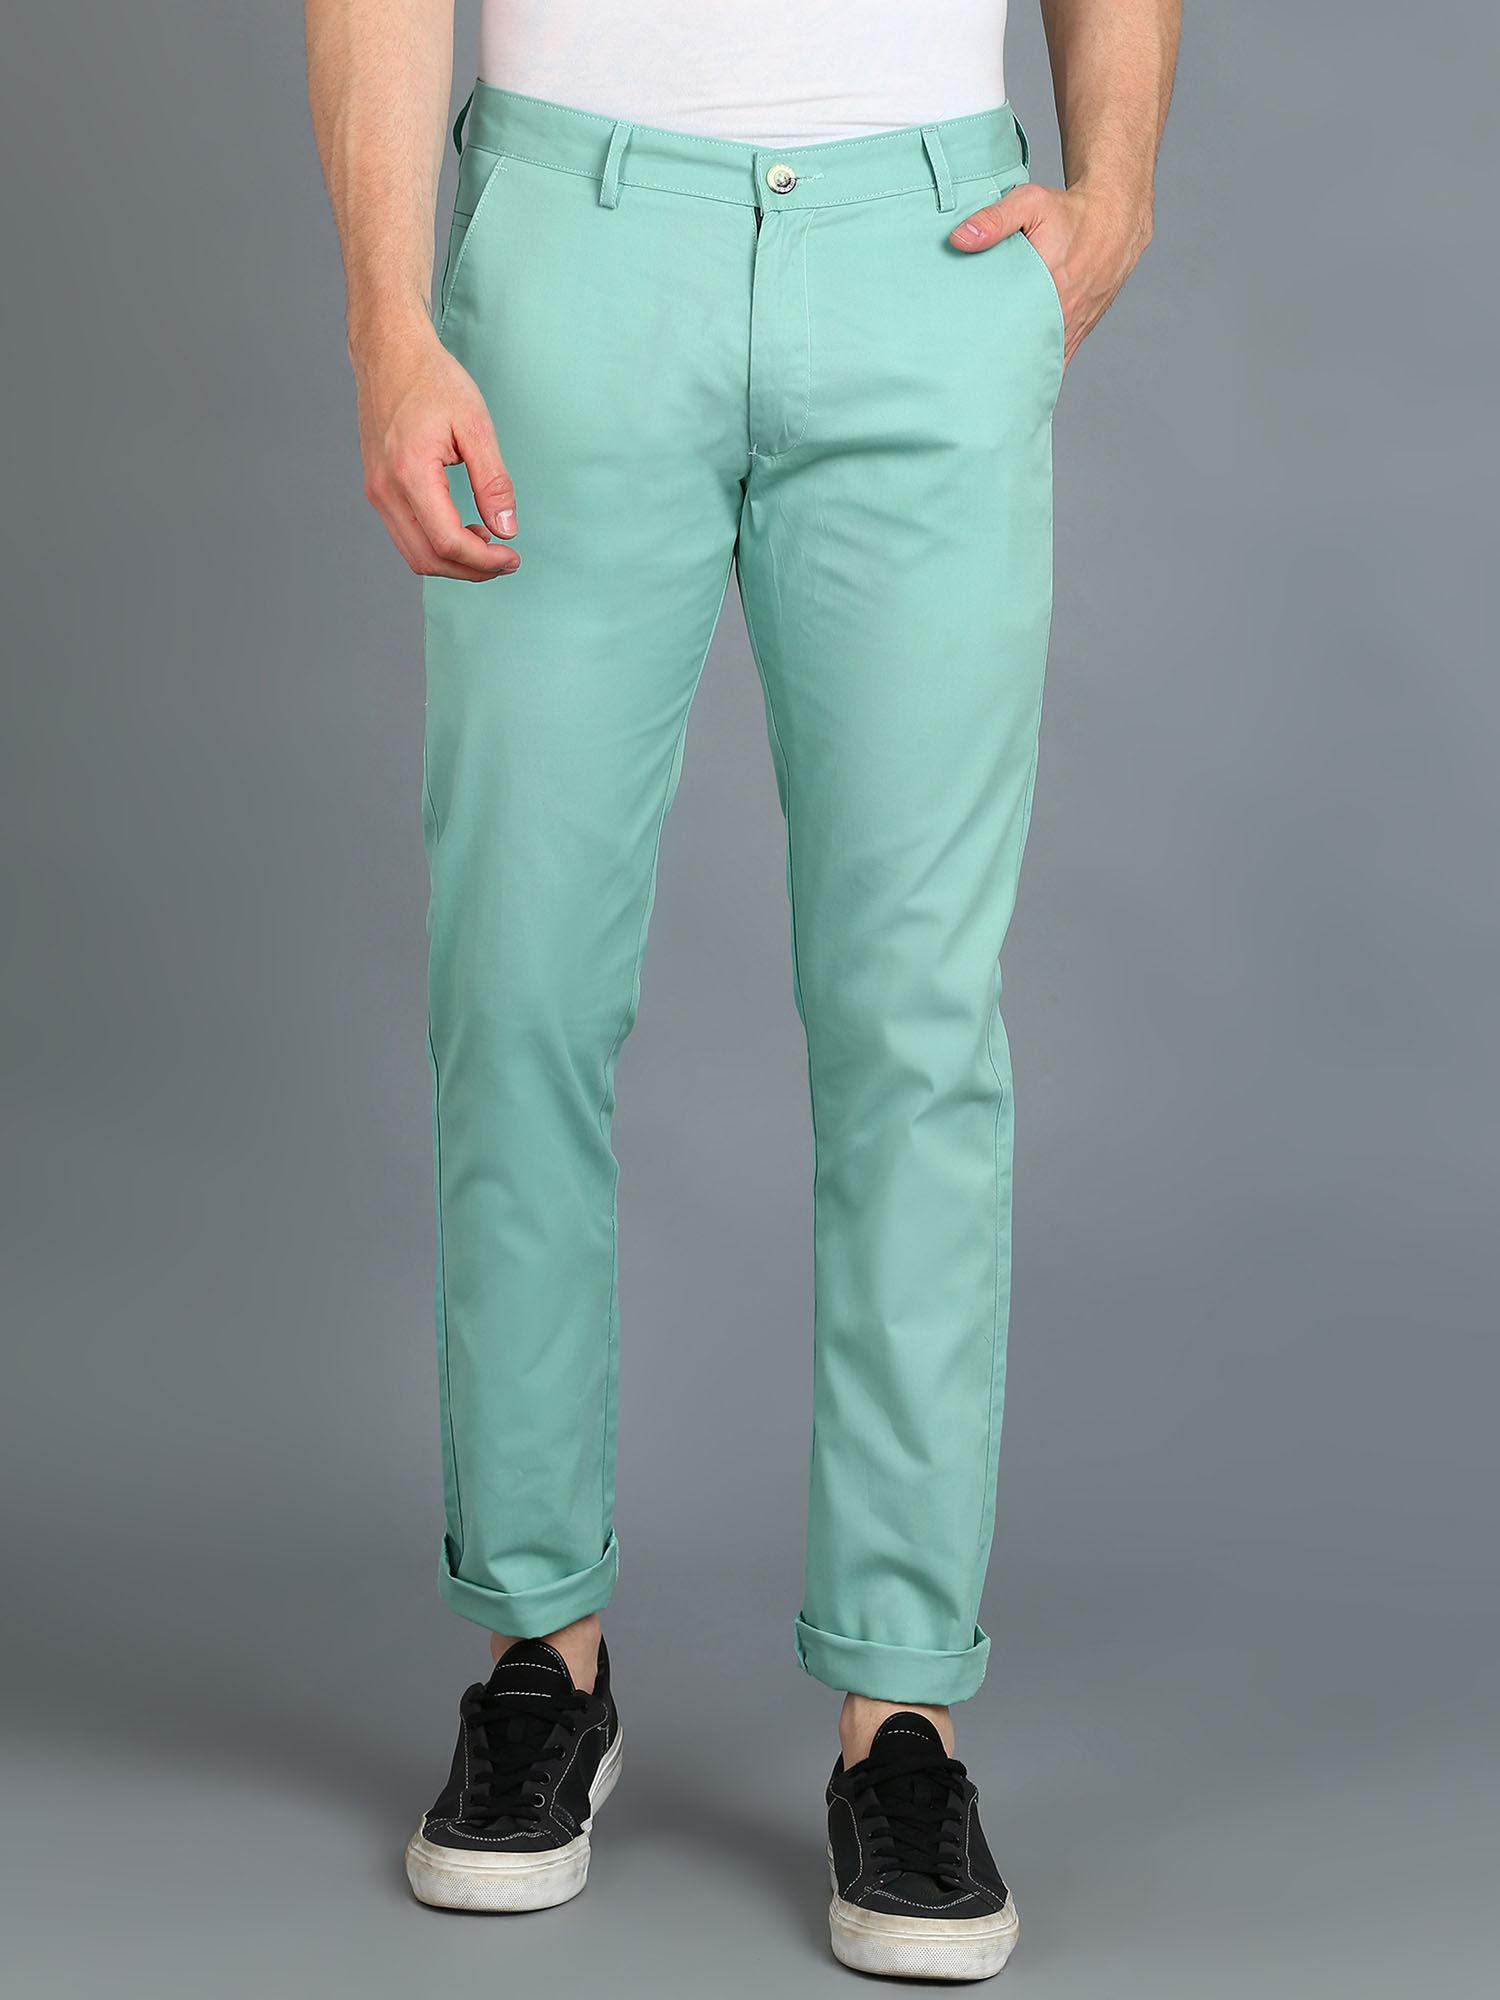 men-green-cotton-slim-fit-casual-chinos-trousers